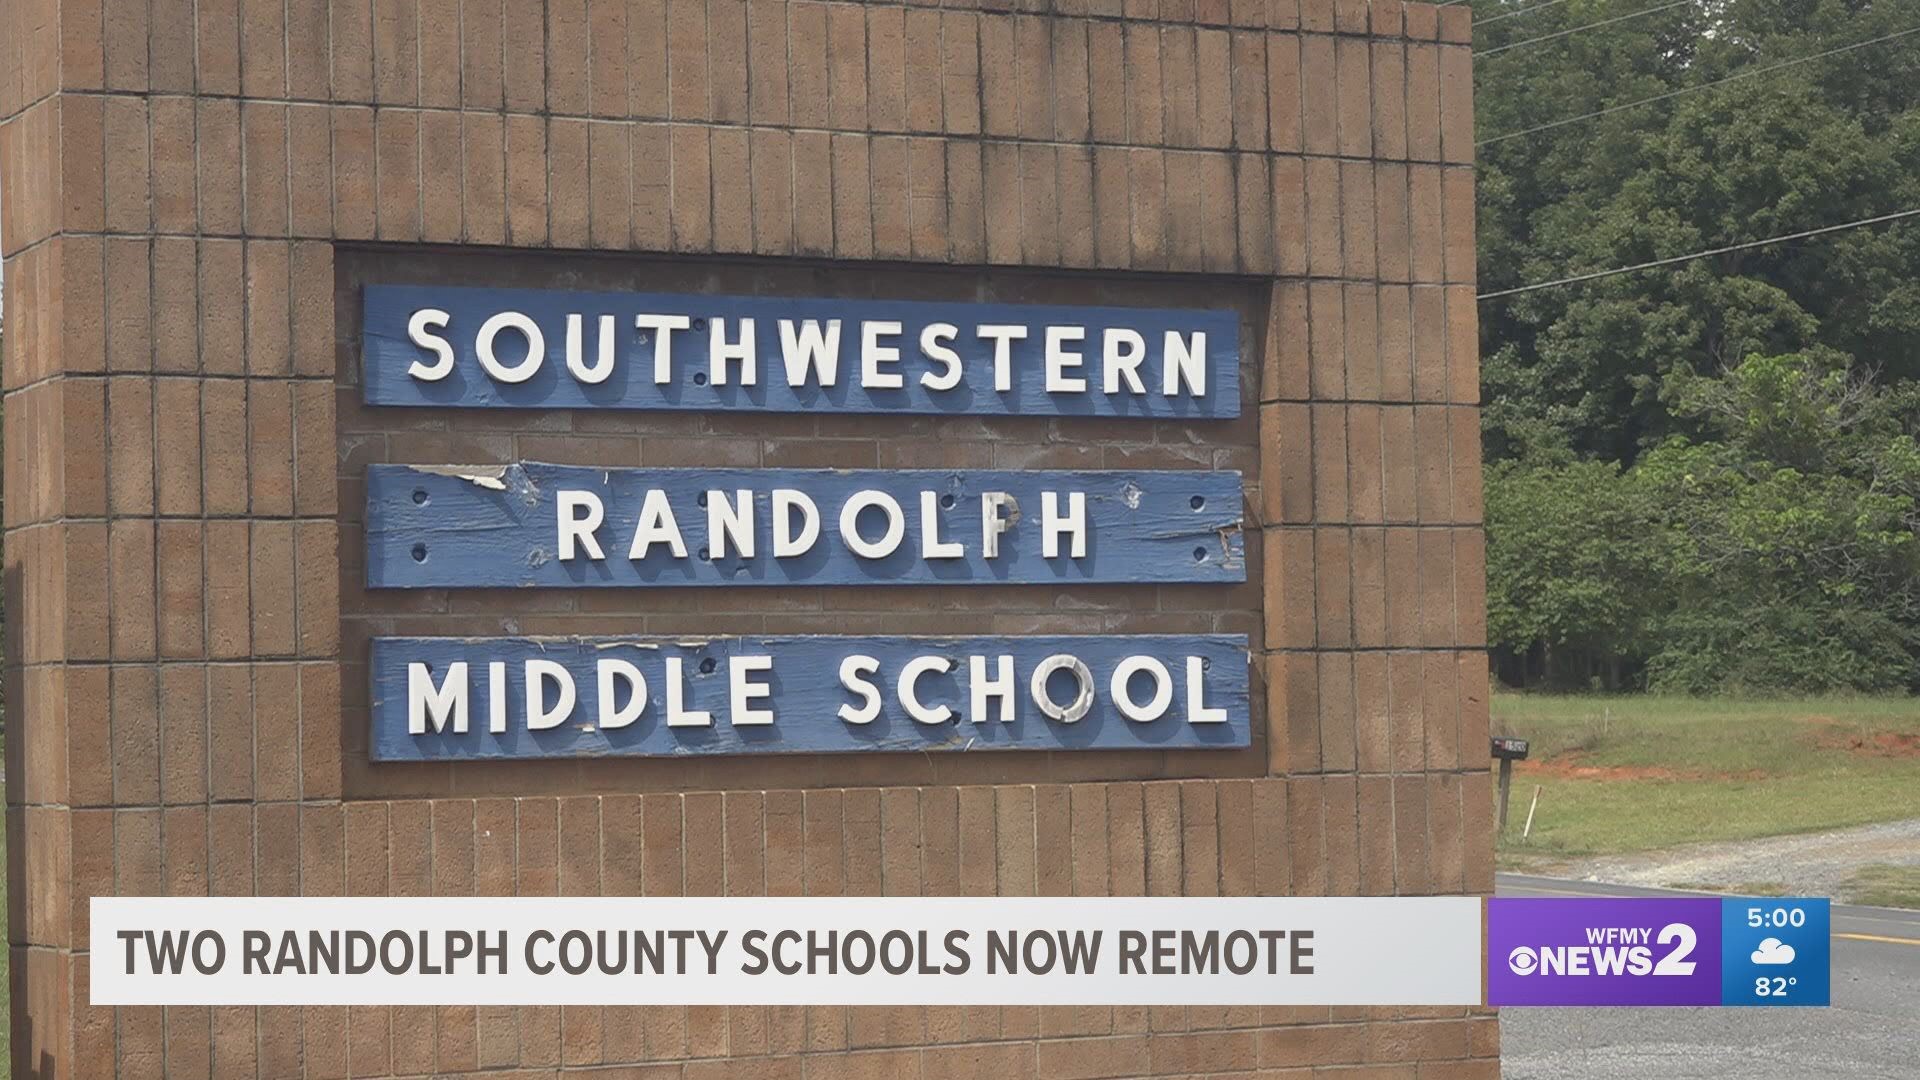 Two Randolph County schools switch to remote learning over COVID